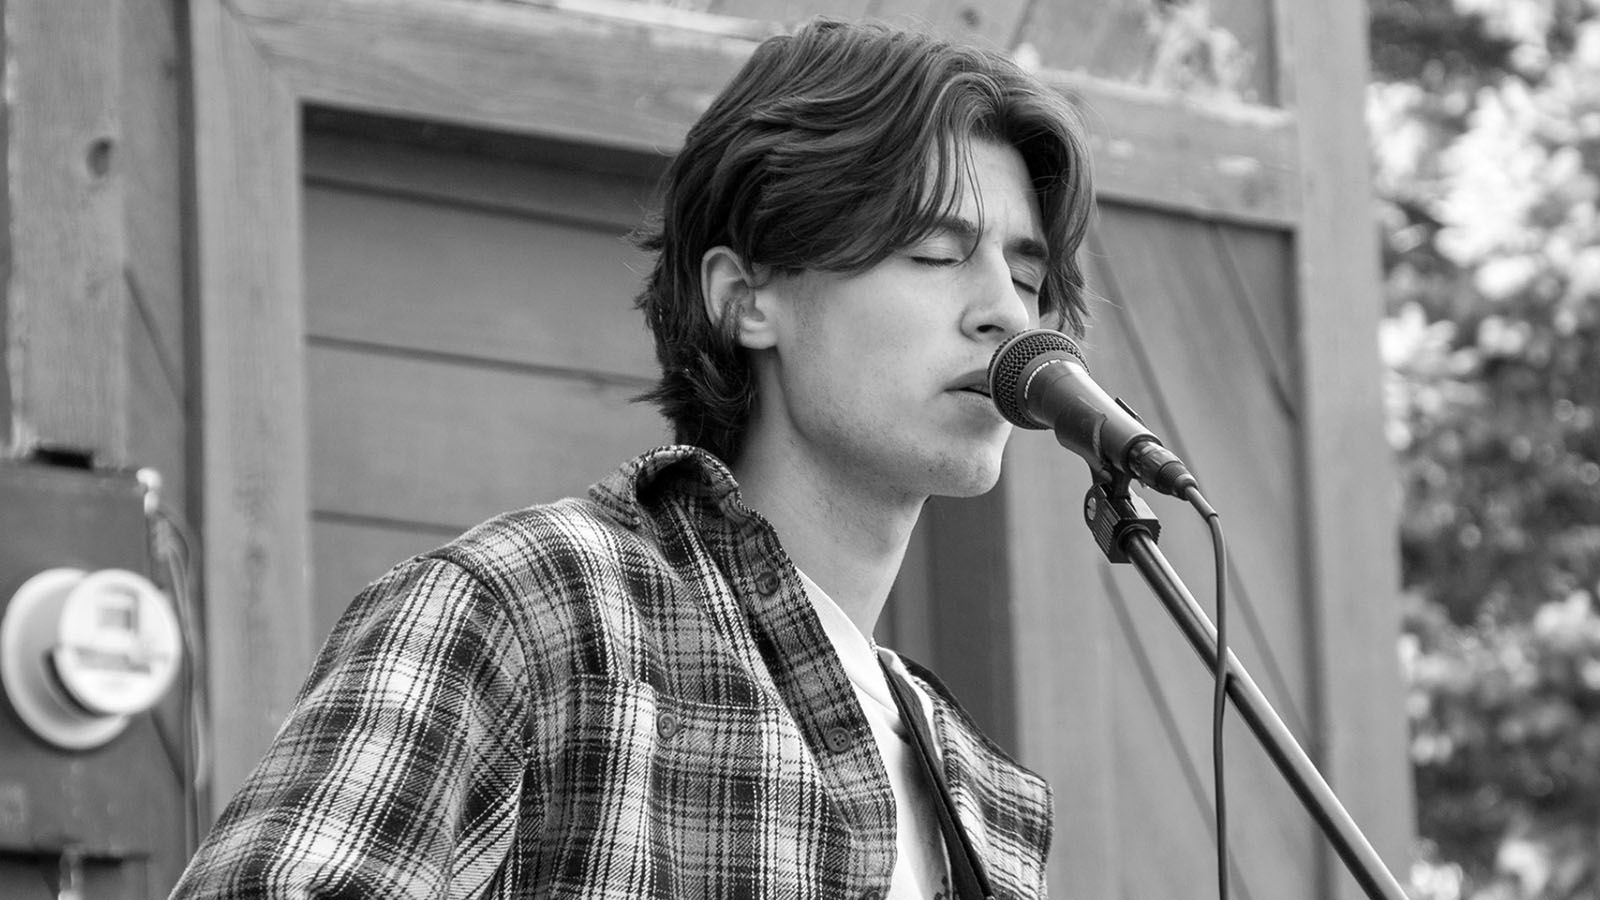 Noah Sties goes a little further than your average singer-songwriter, and now he’s featured in the ALT Homegrown Spotlight.